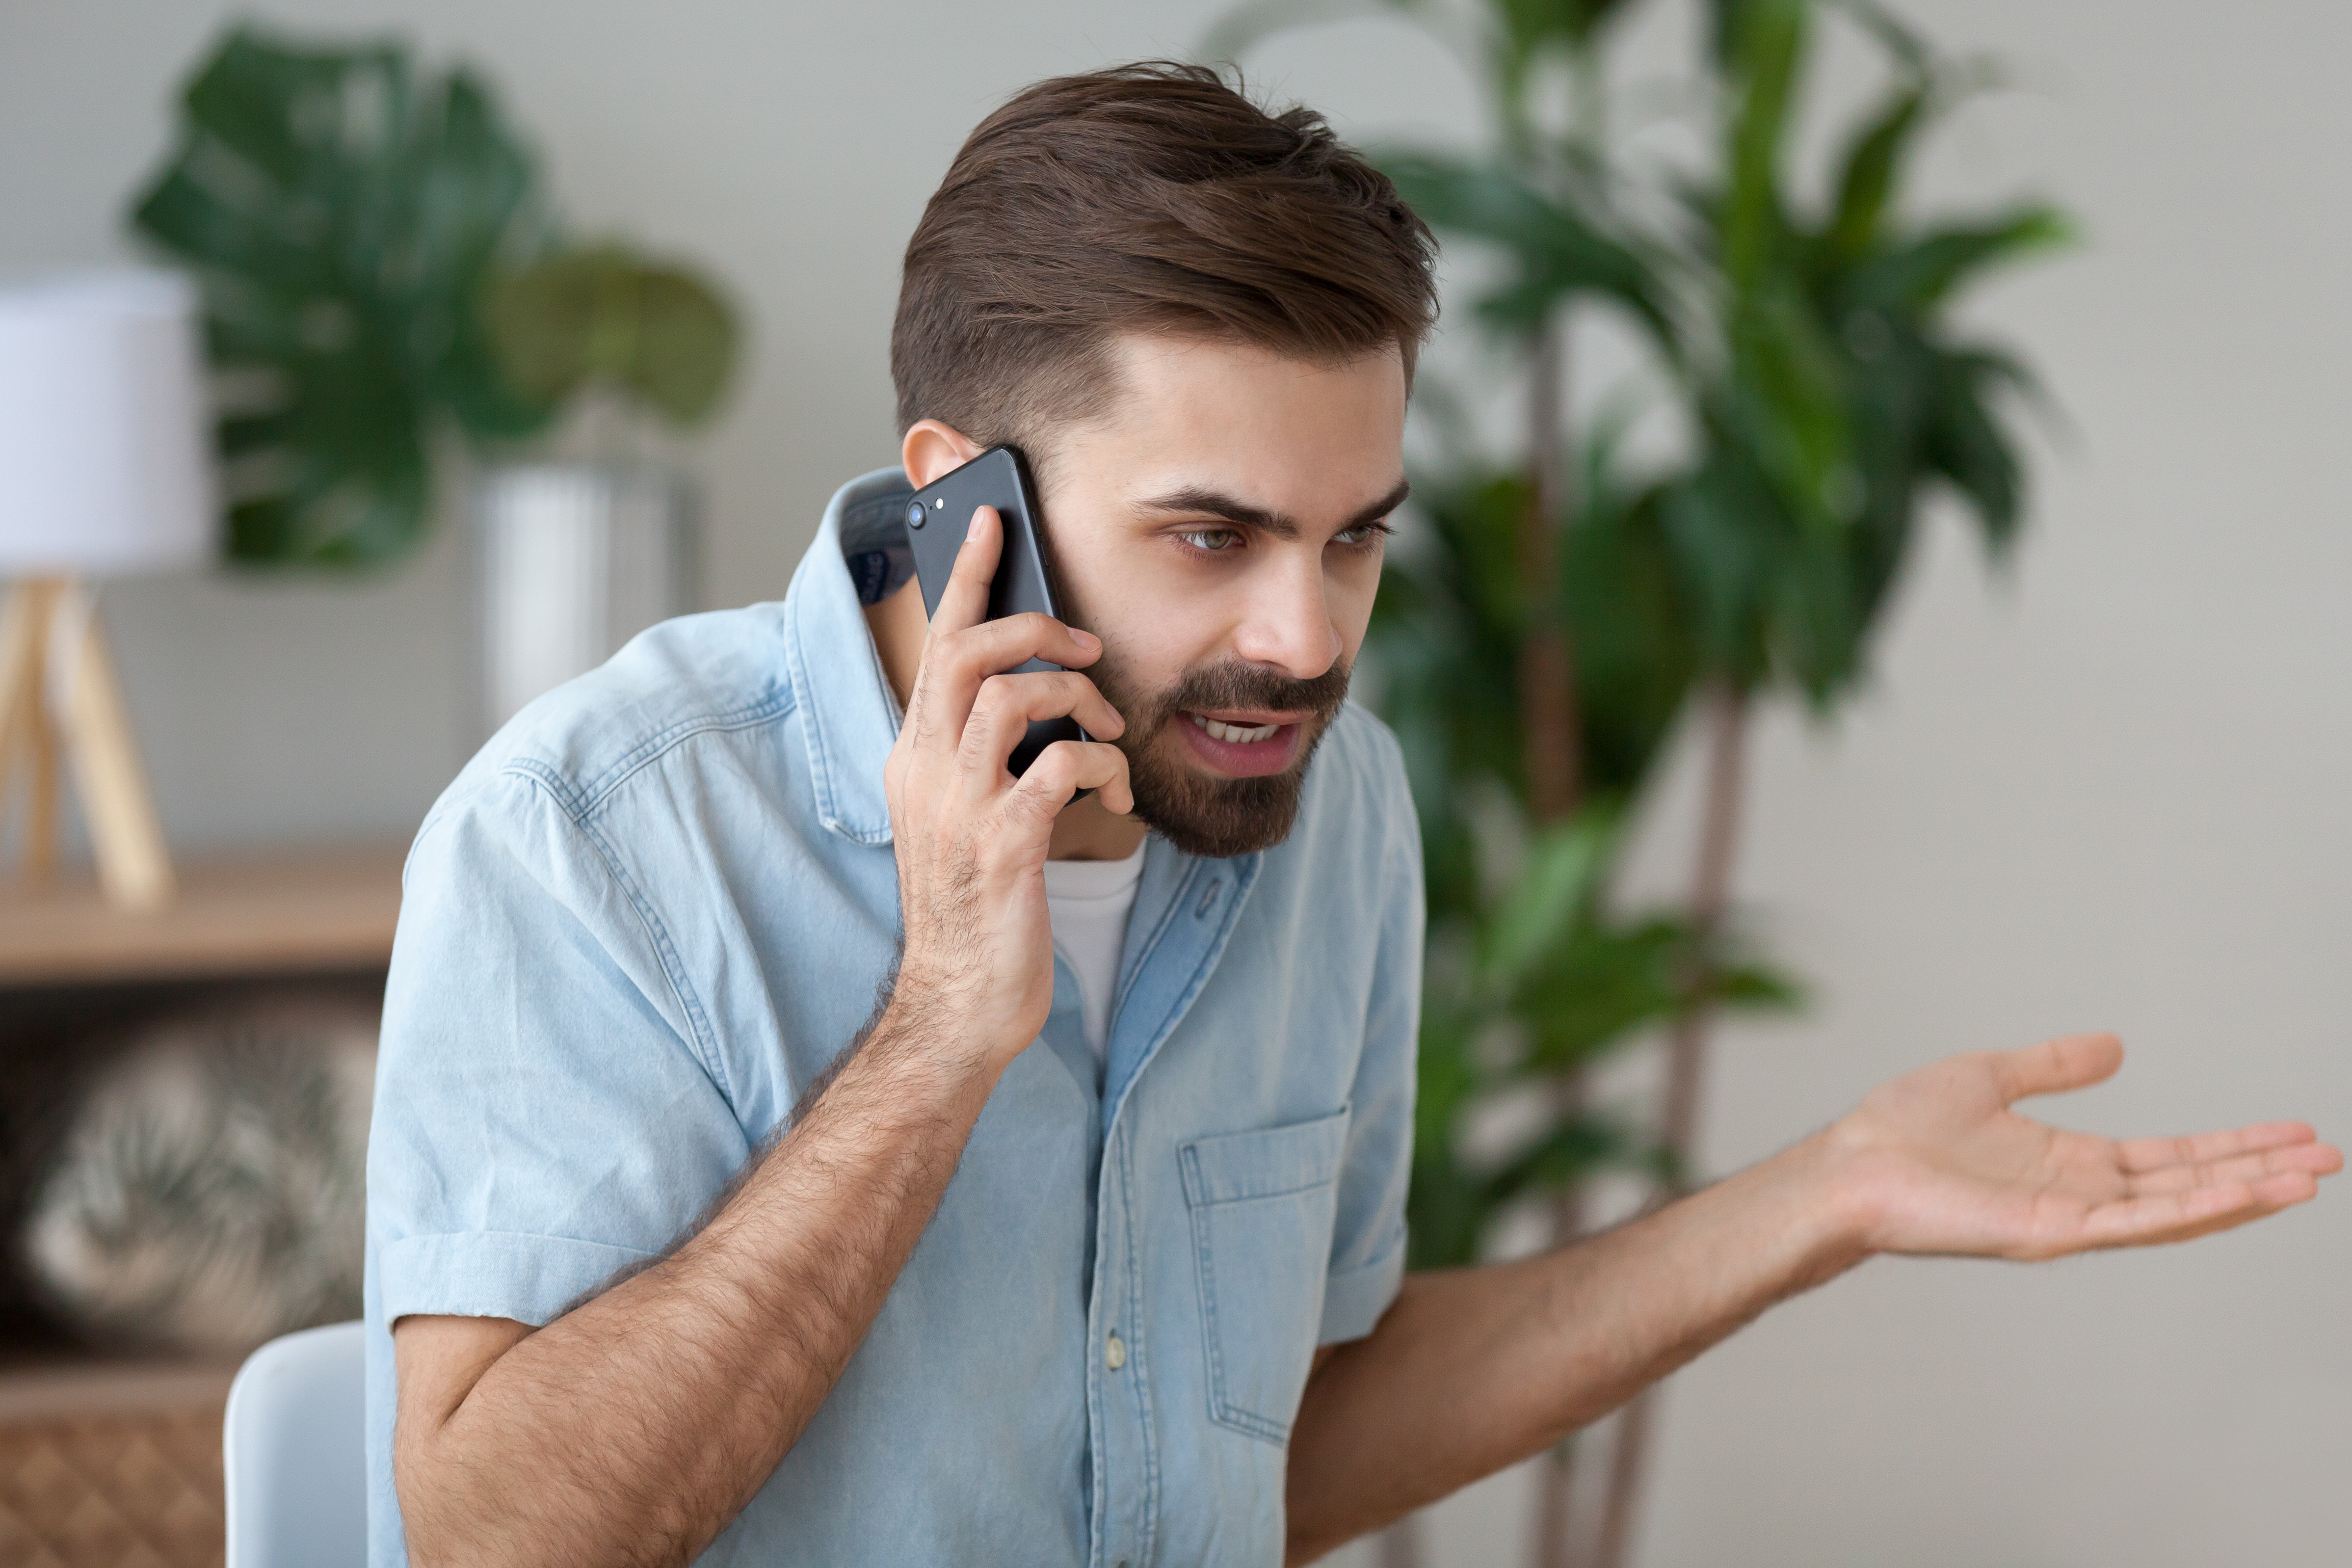 A man on the phone | Source: Shutterstock